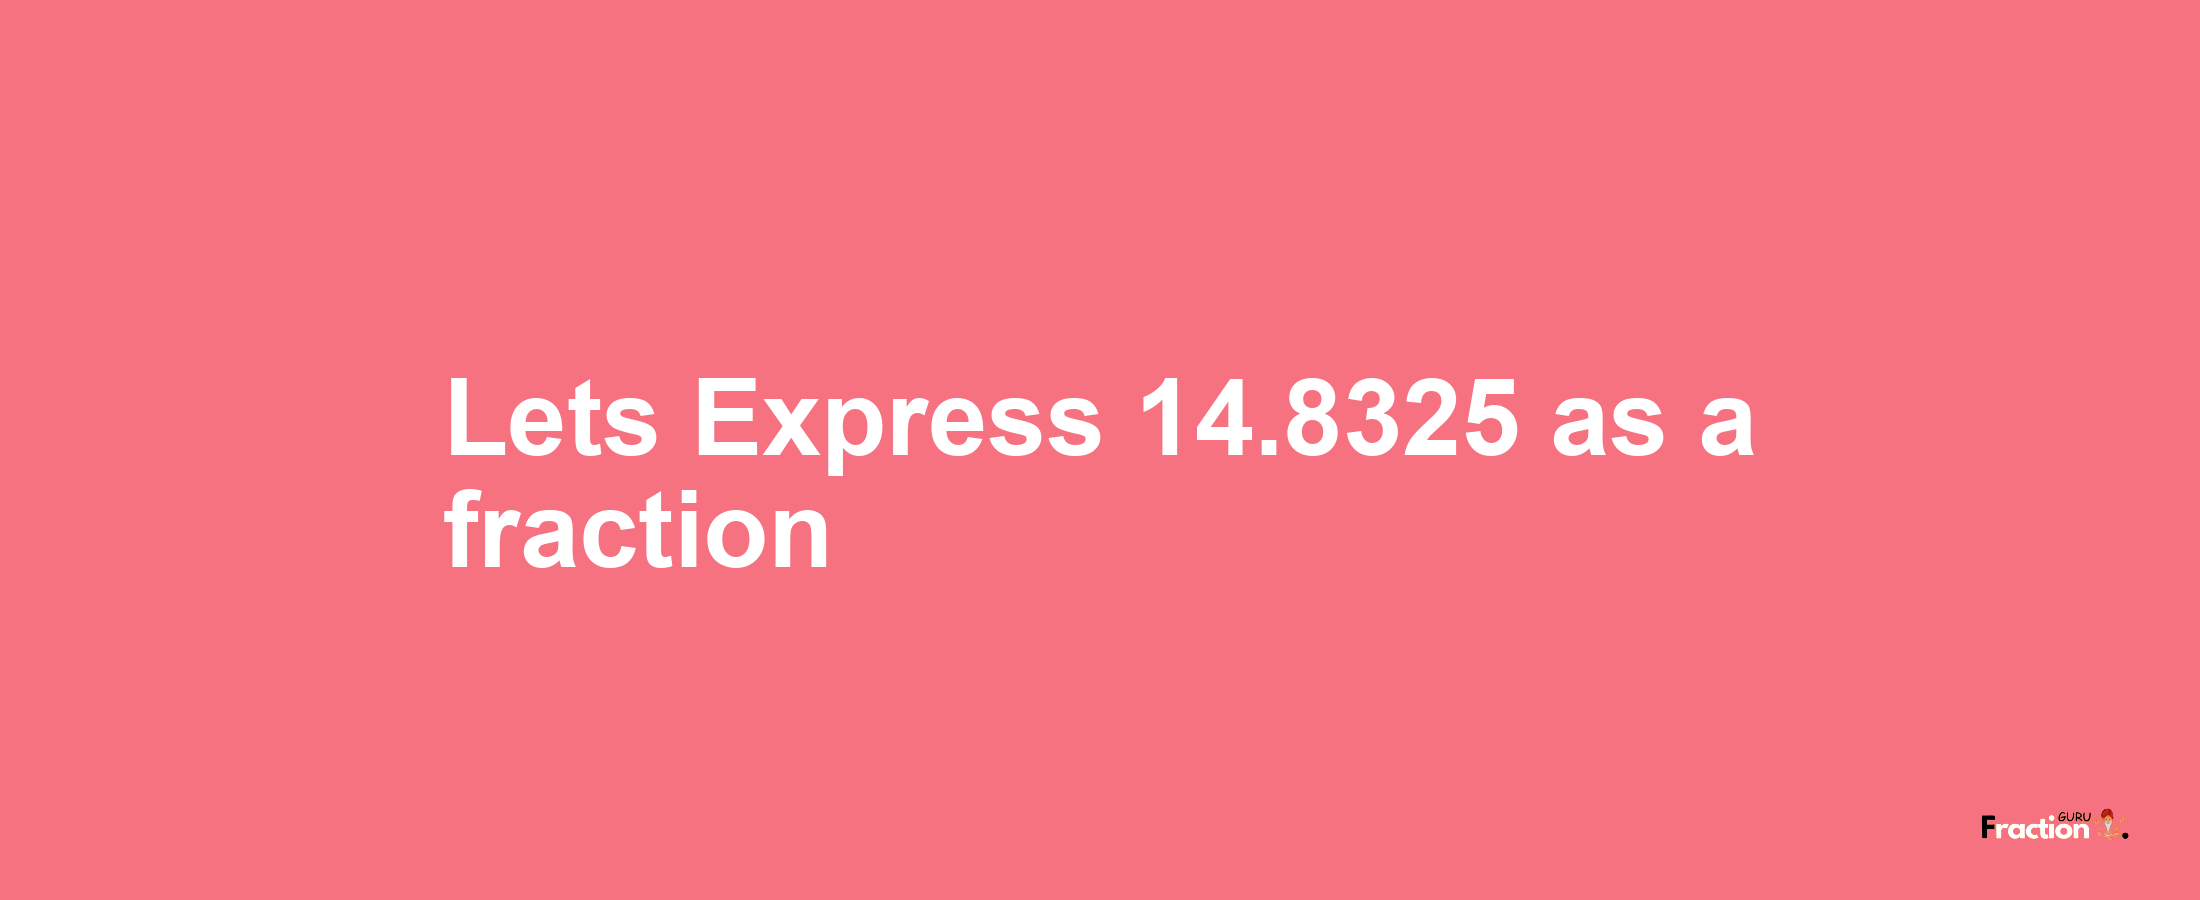 Lets Express 14.8325 as afraction